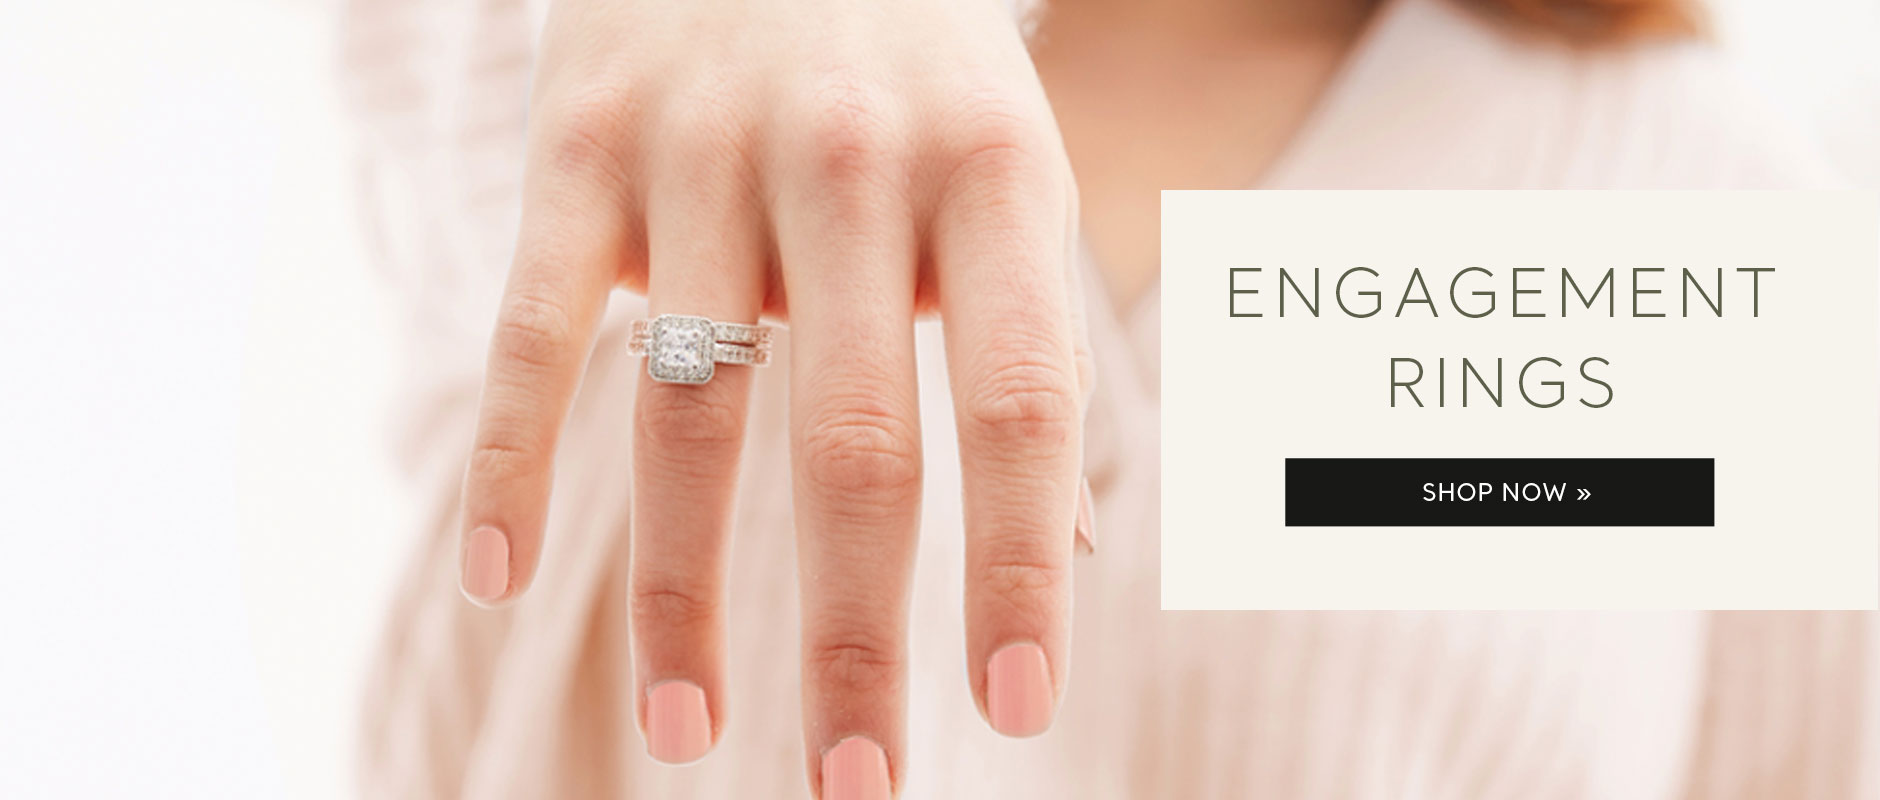 Engagement Rings. Shop Now.